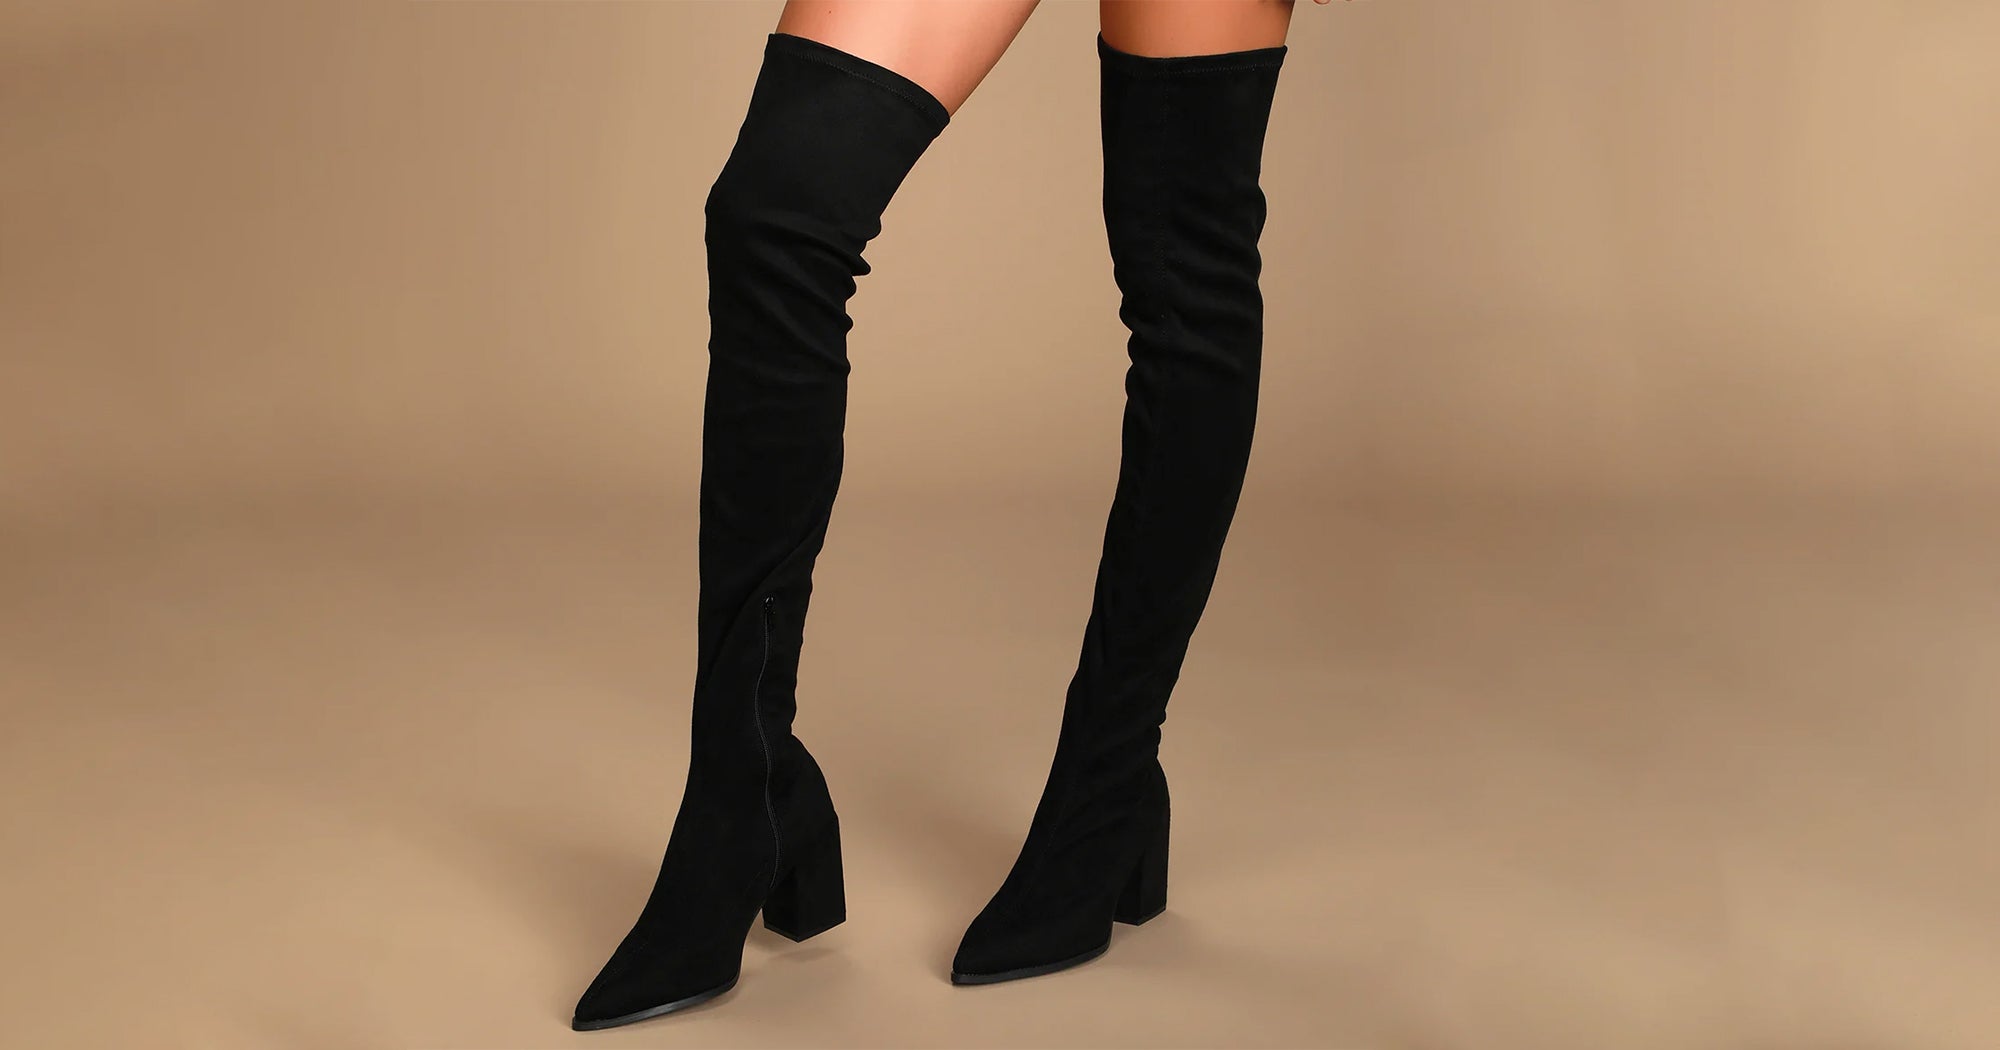 Details about  / Women/'s Fashion Faux Suede Elastic Slim Fit High Heel Over Knee Boots Shoes SUNS